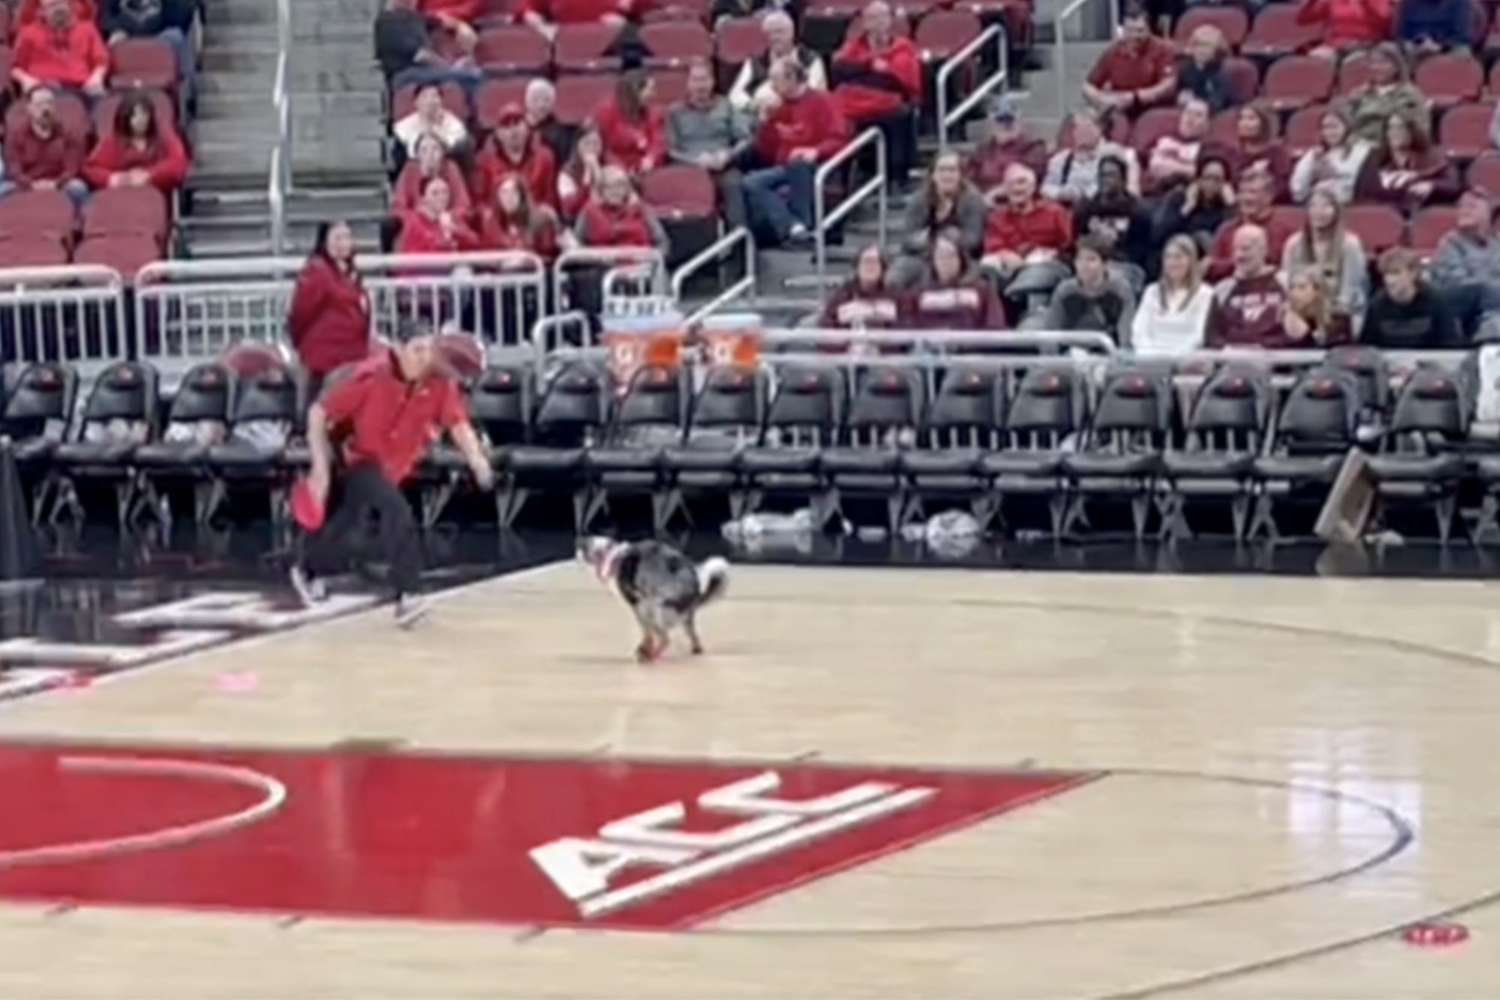 Frisbee Dog Poops on Louisville Basketball Court in Viral Videos | Daily Paws